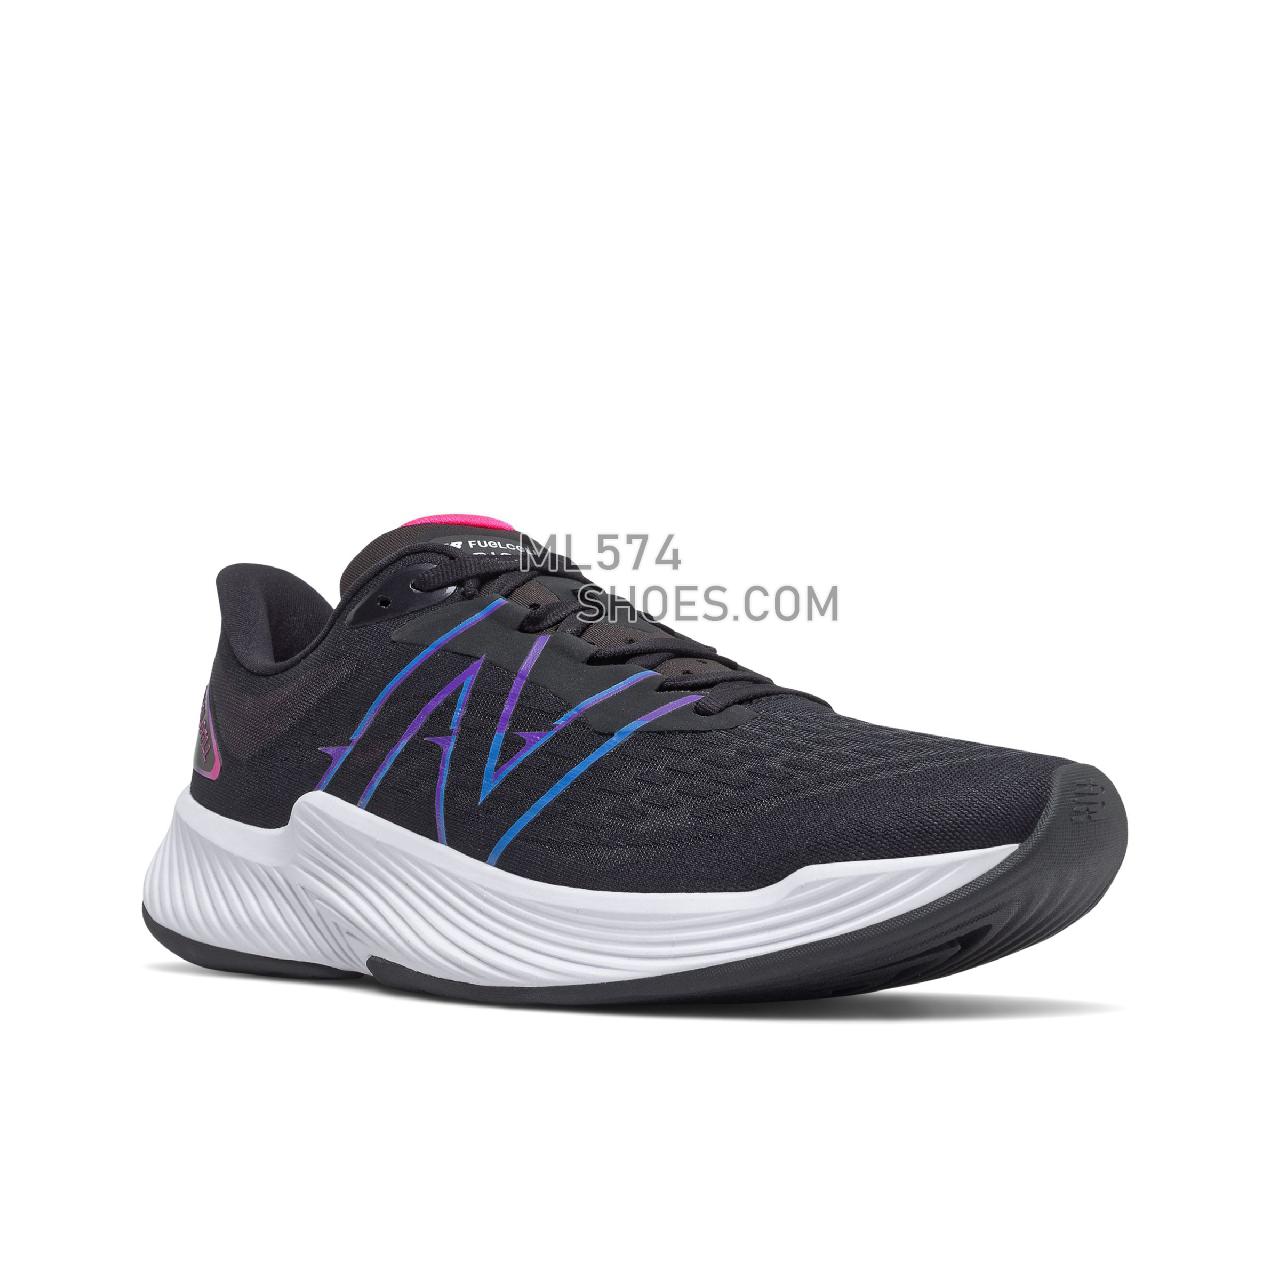 New Balance FuelCell Prism v2 - Men's Stability Running - Black with Deep Violet - MFCPZLB2